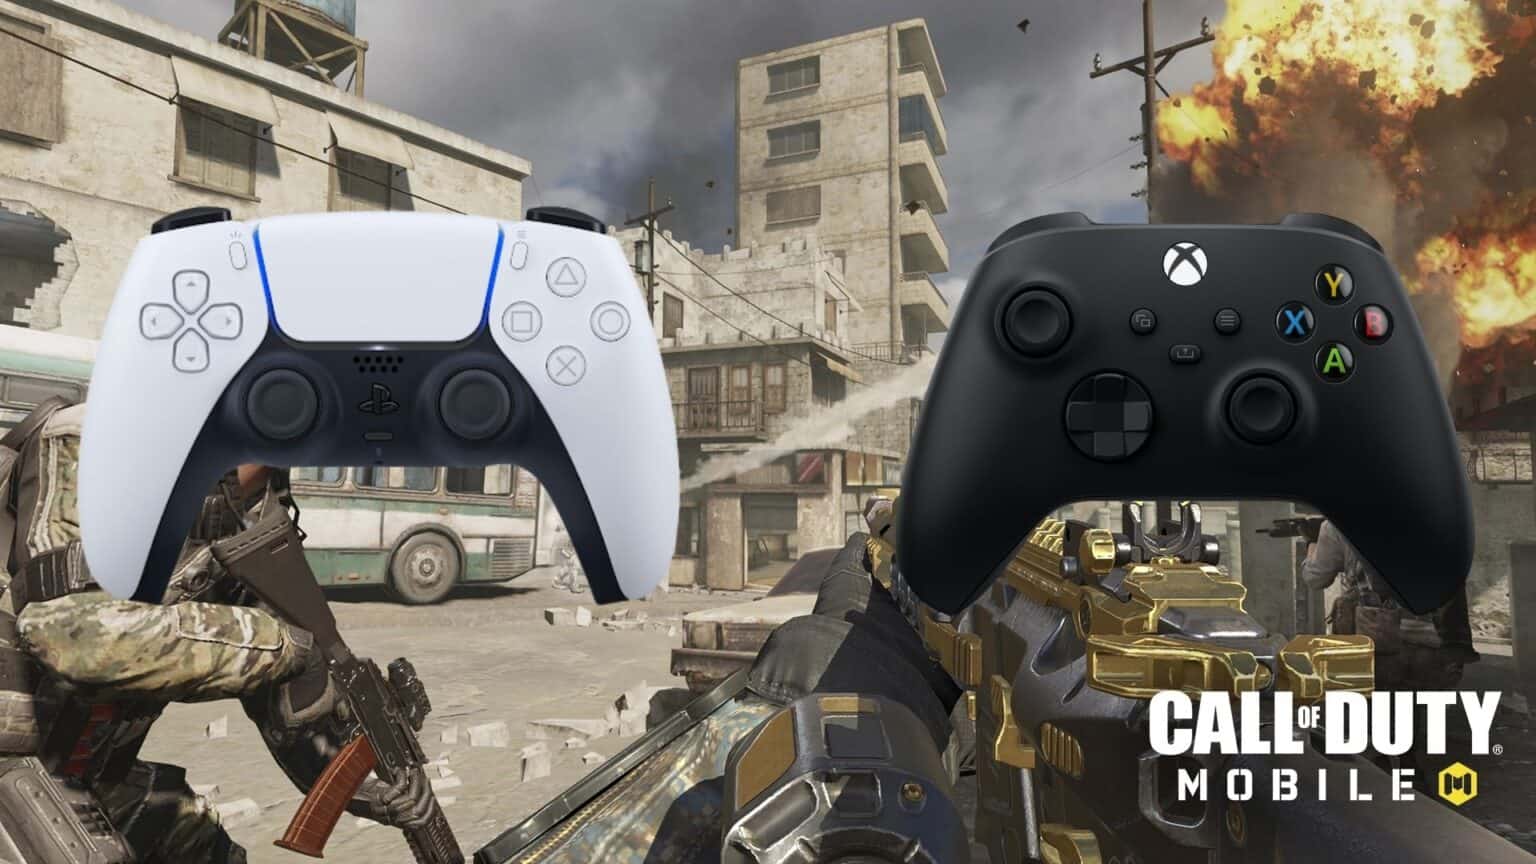 How-to-play-with-controllers-on-CoD_-Mobile-FEATURED-1536x864